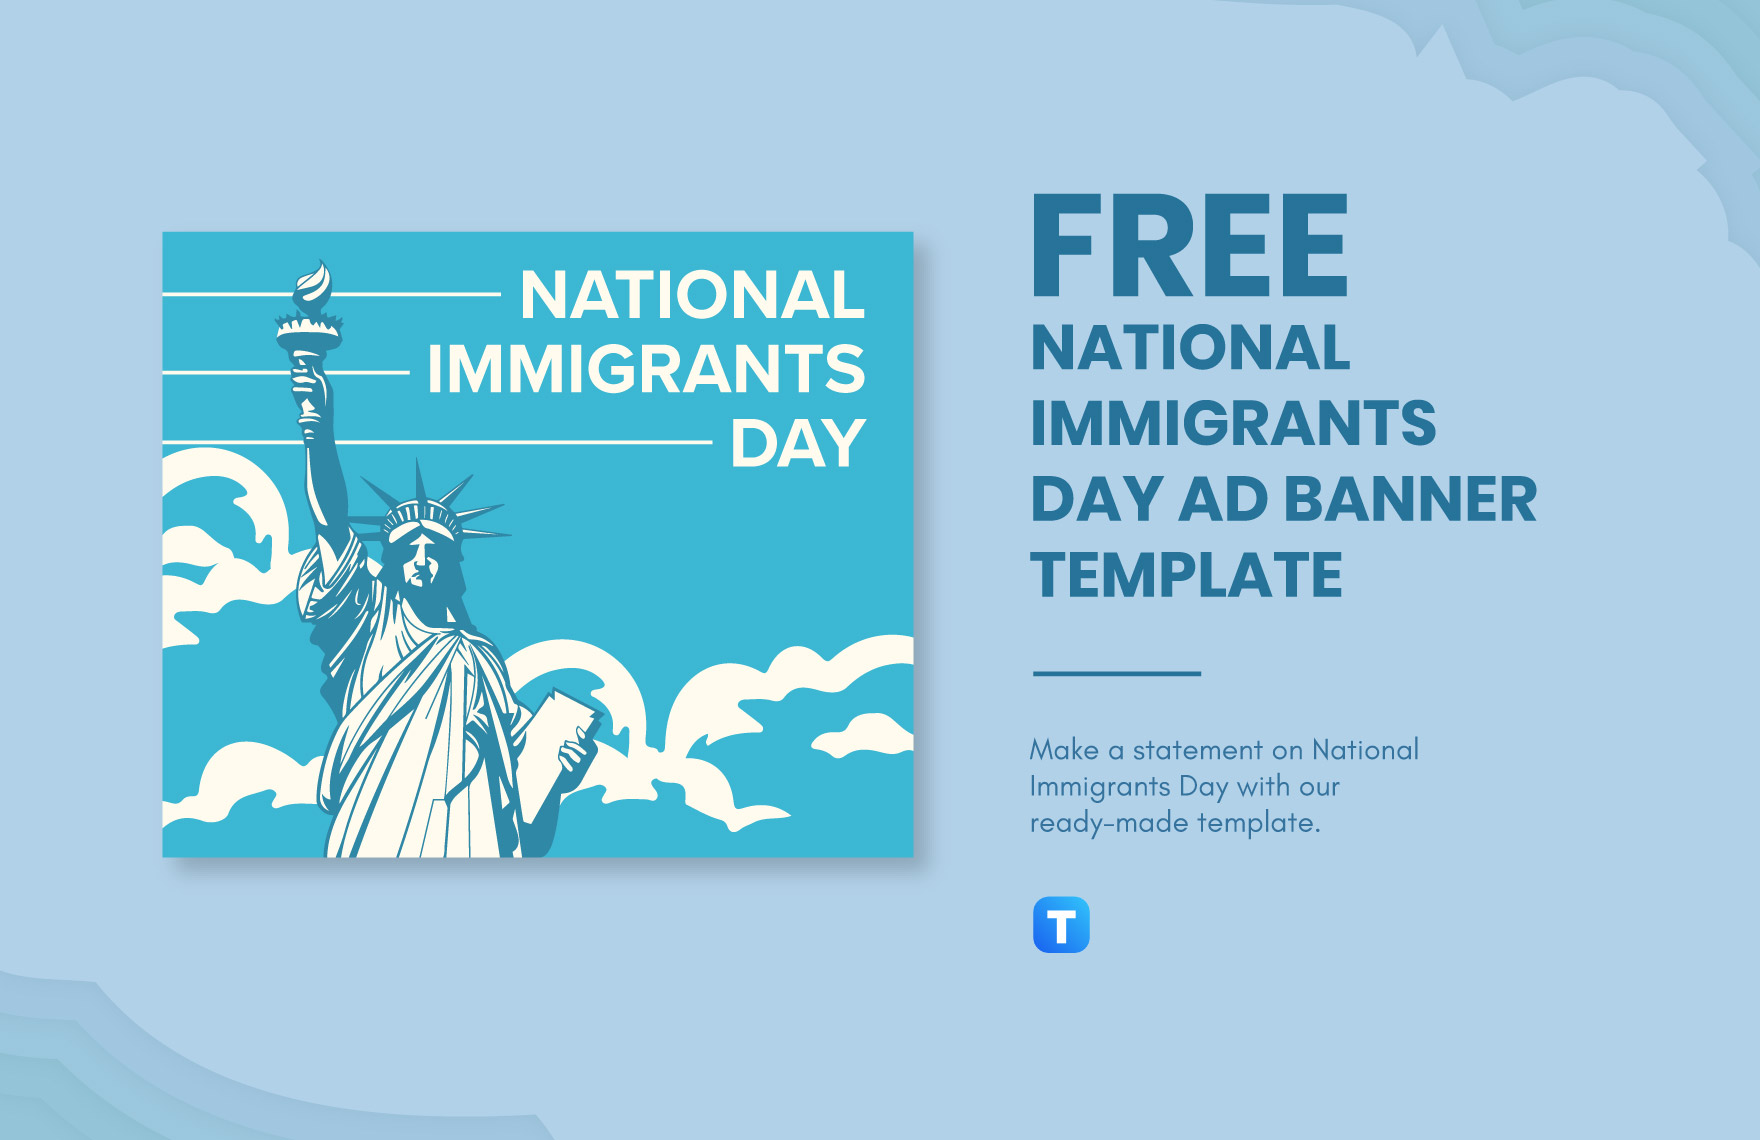 National Immigrants Day Ad Banner